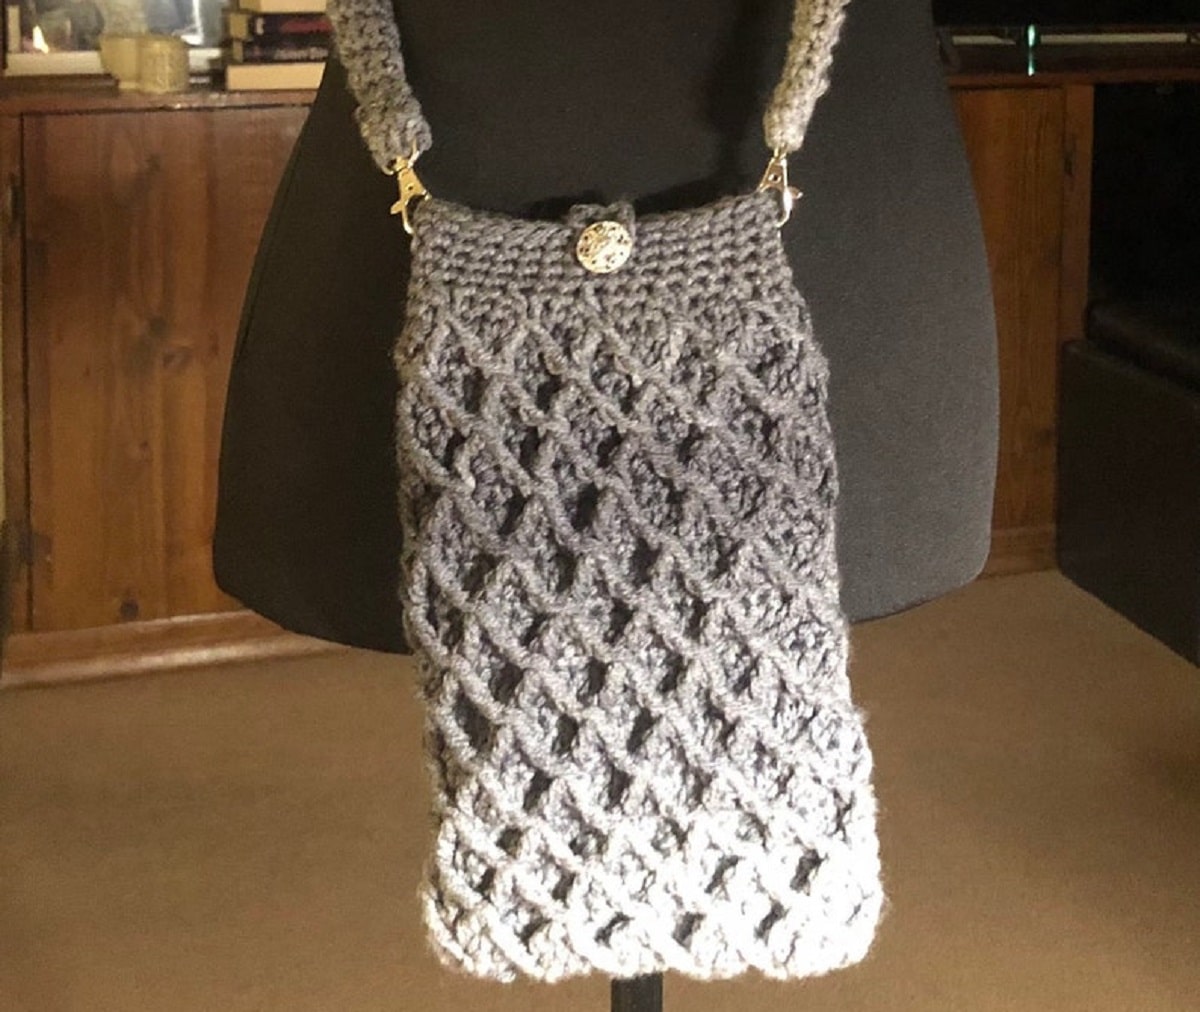 A gray and cream crochet bag with a diamond pattern stitching all over it, a white button at the top to fasten and a large strap. 